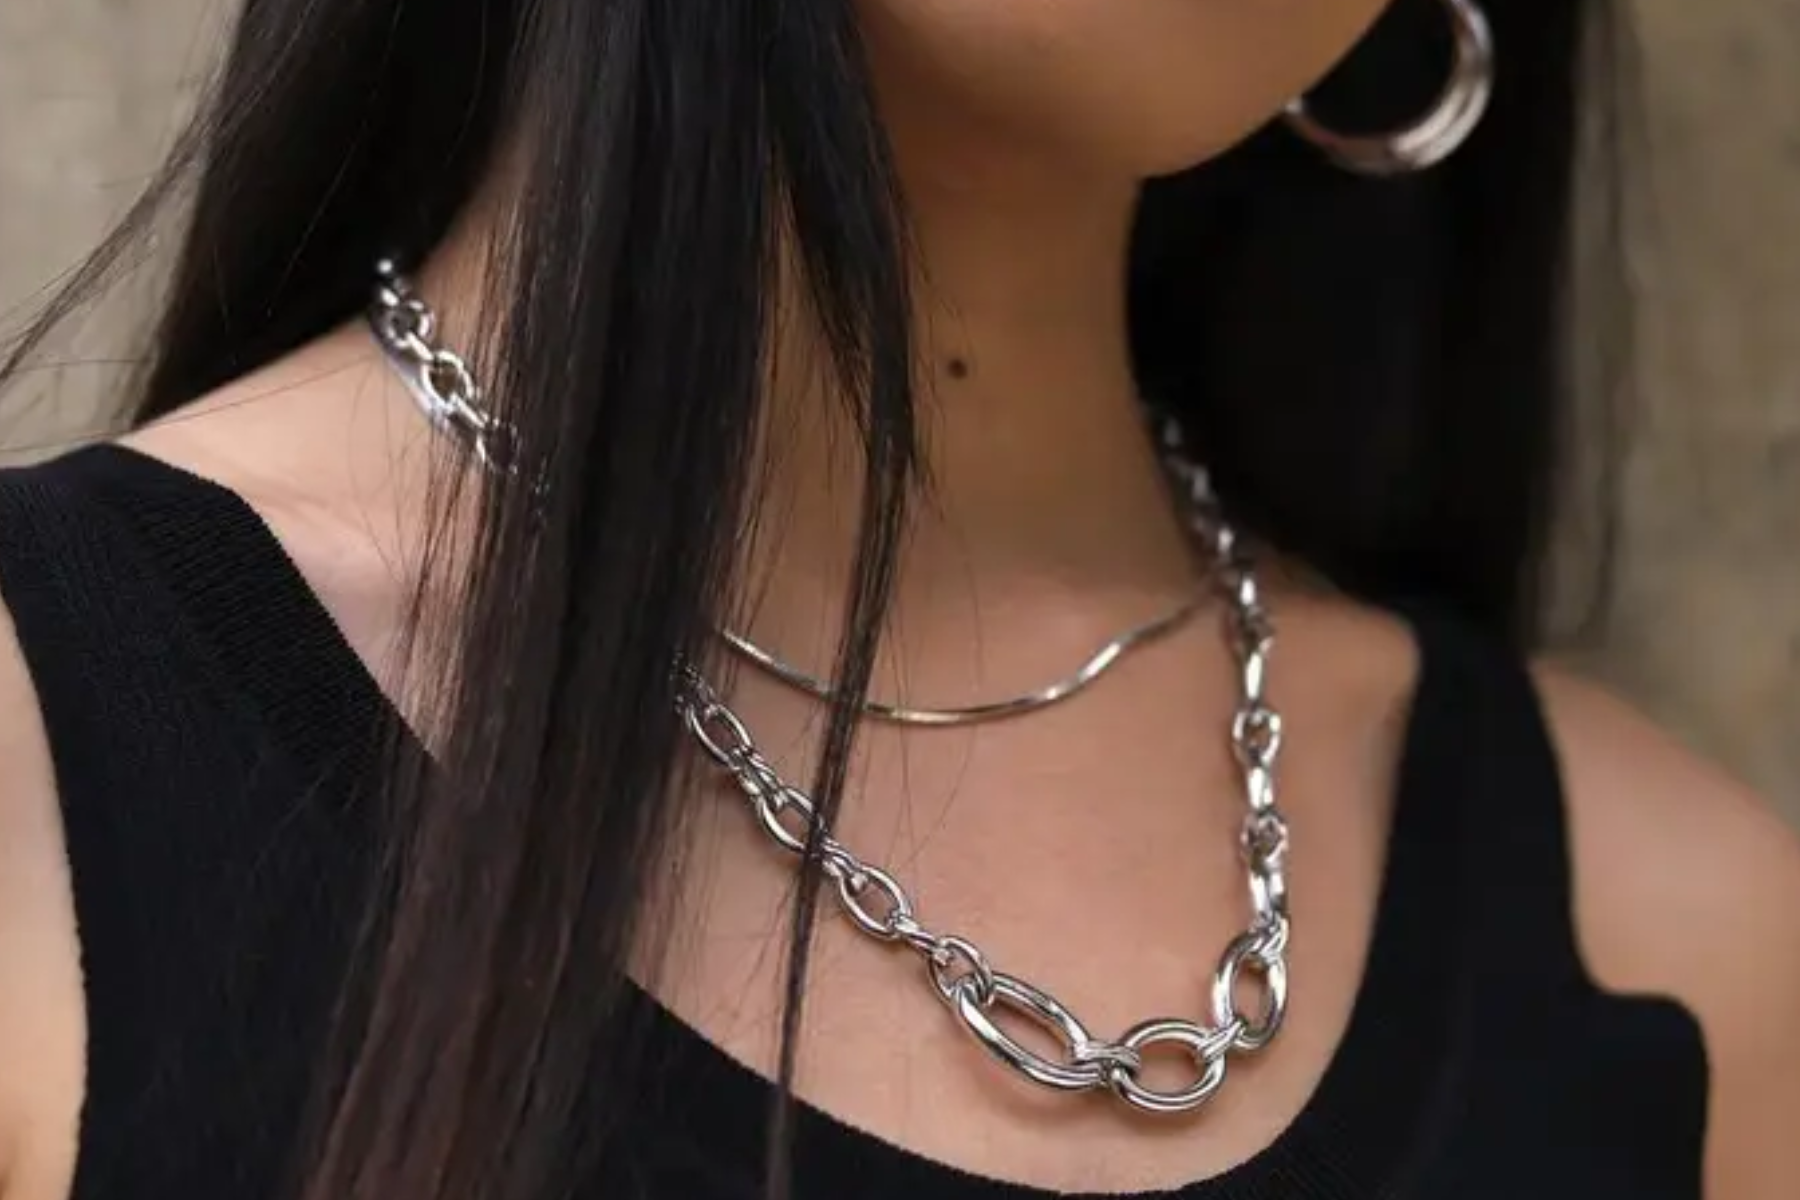 A woman with a black sleeveless shirt, silver necklaces, and silver earrings